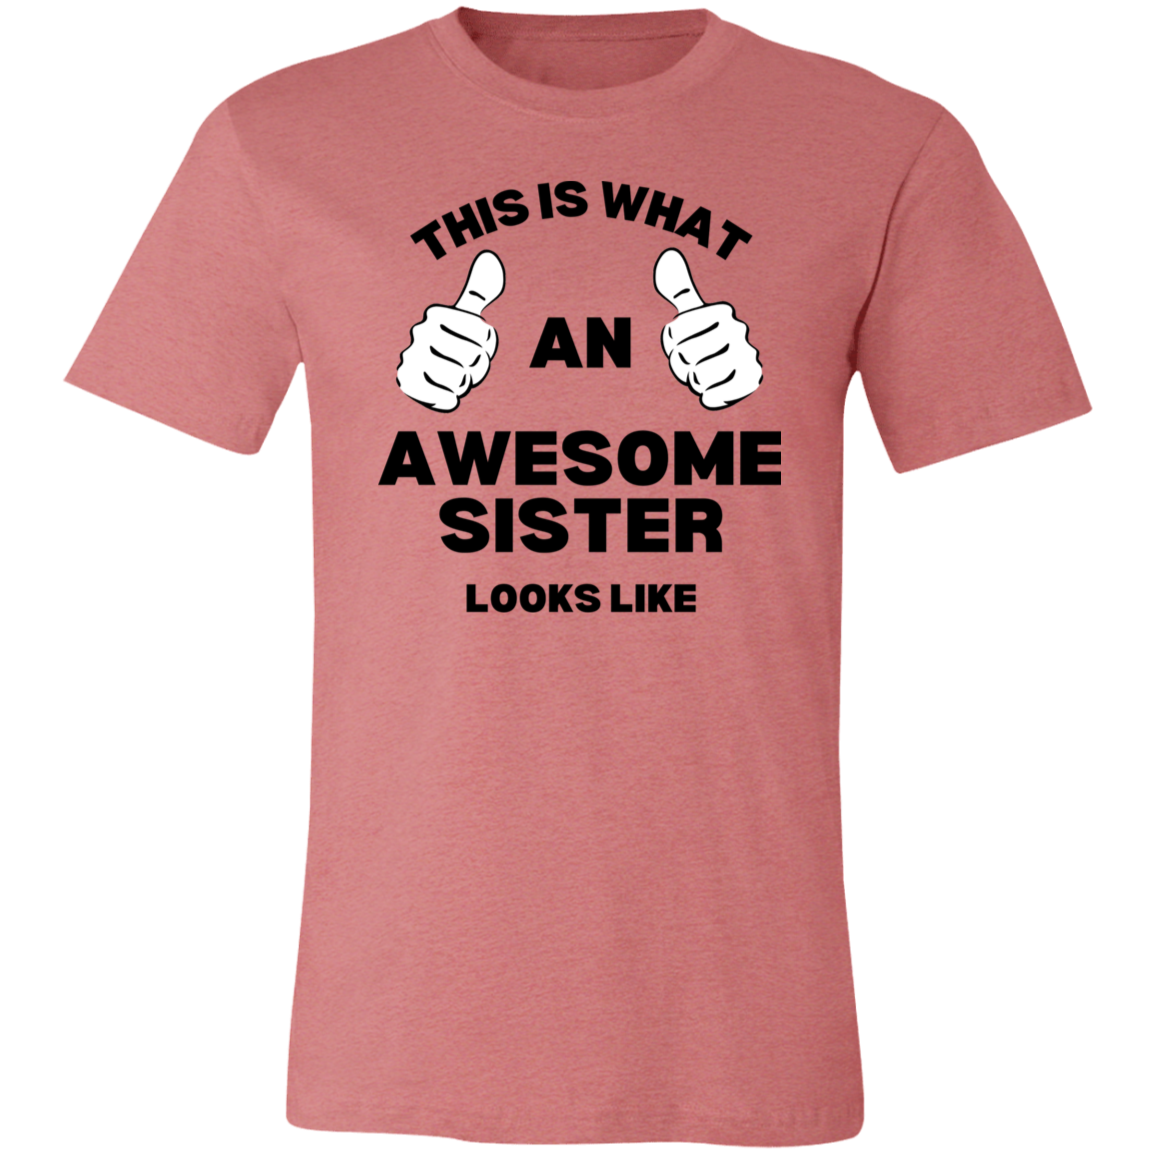 This Is What An Awesome Sister Looks Like T-Shirt (Adult)